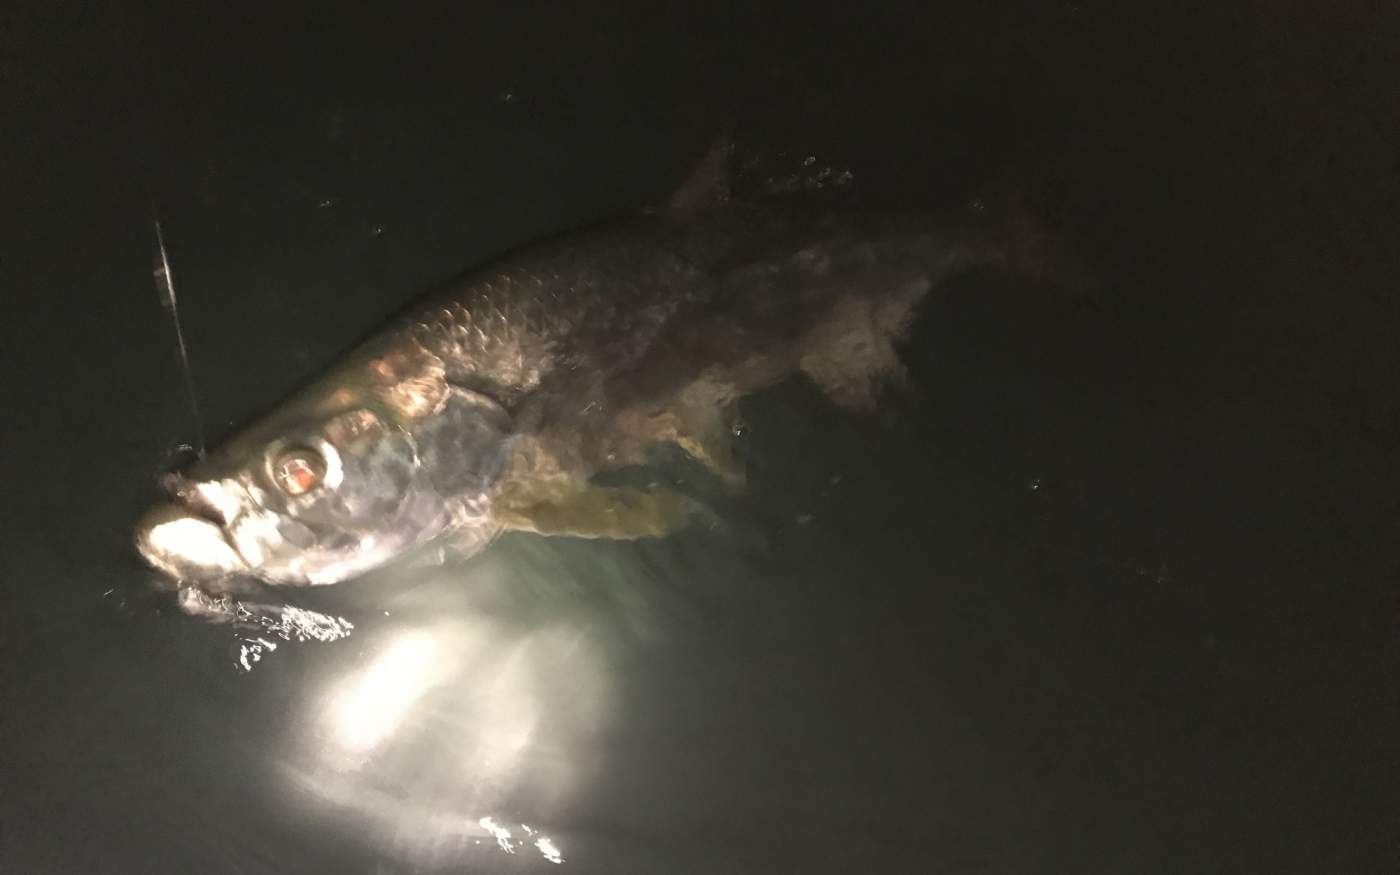 Tarpon in water facing boat with water on it